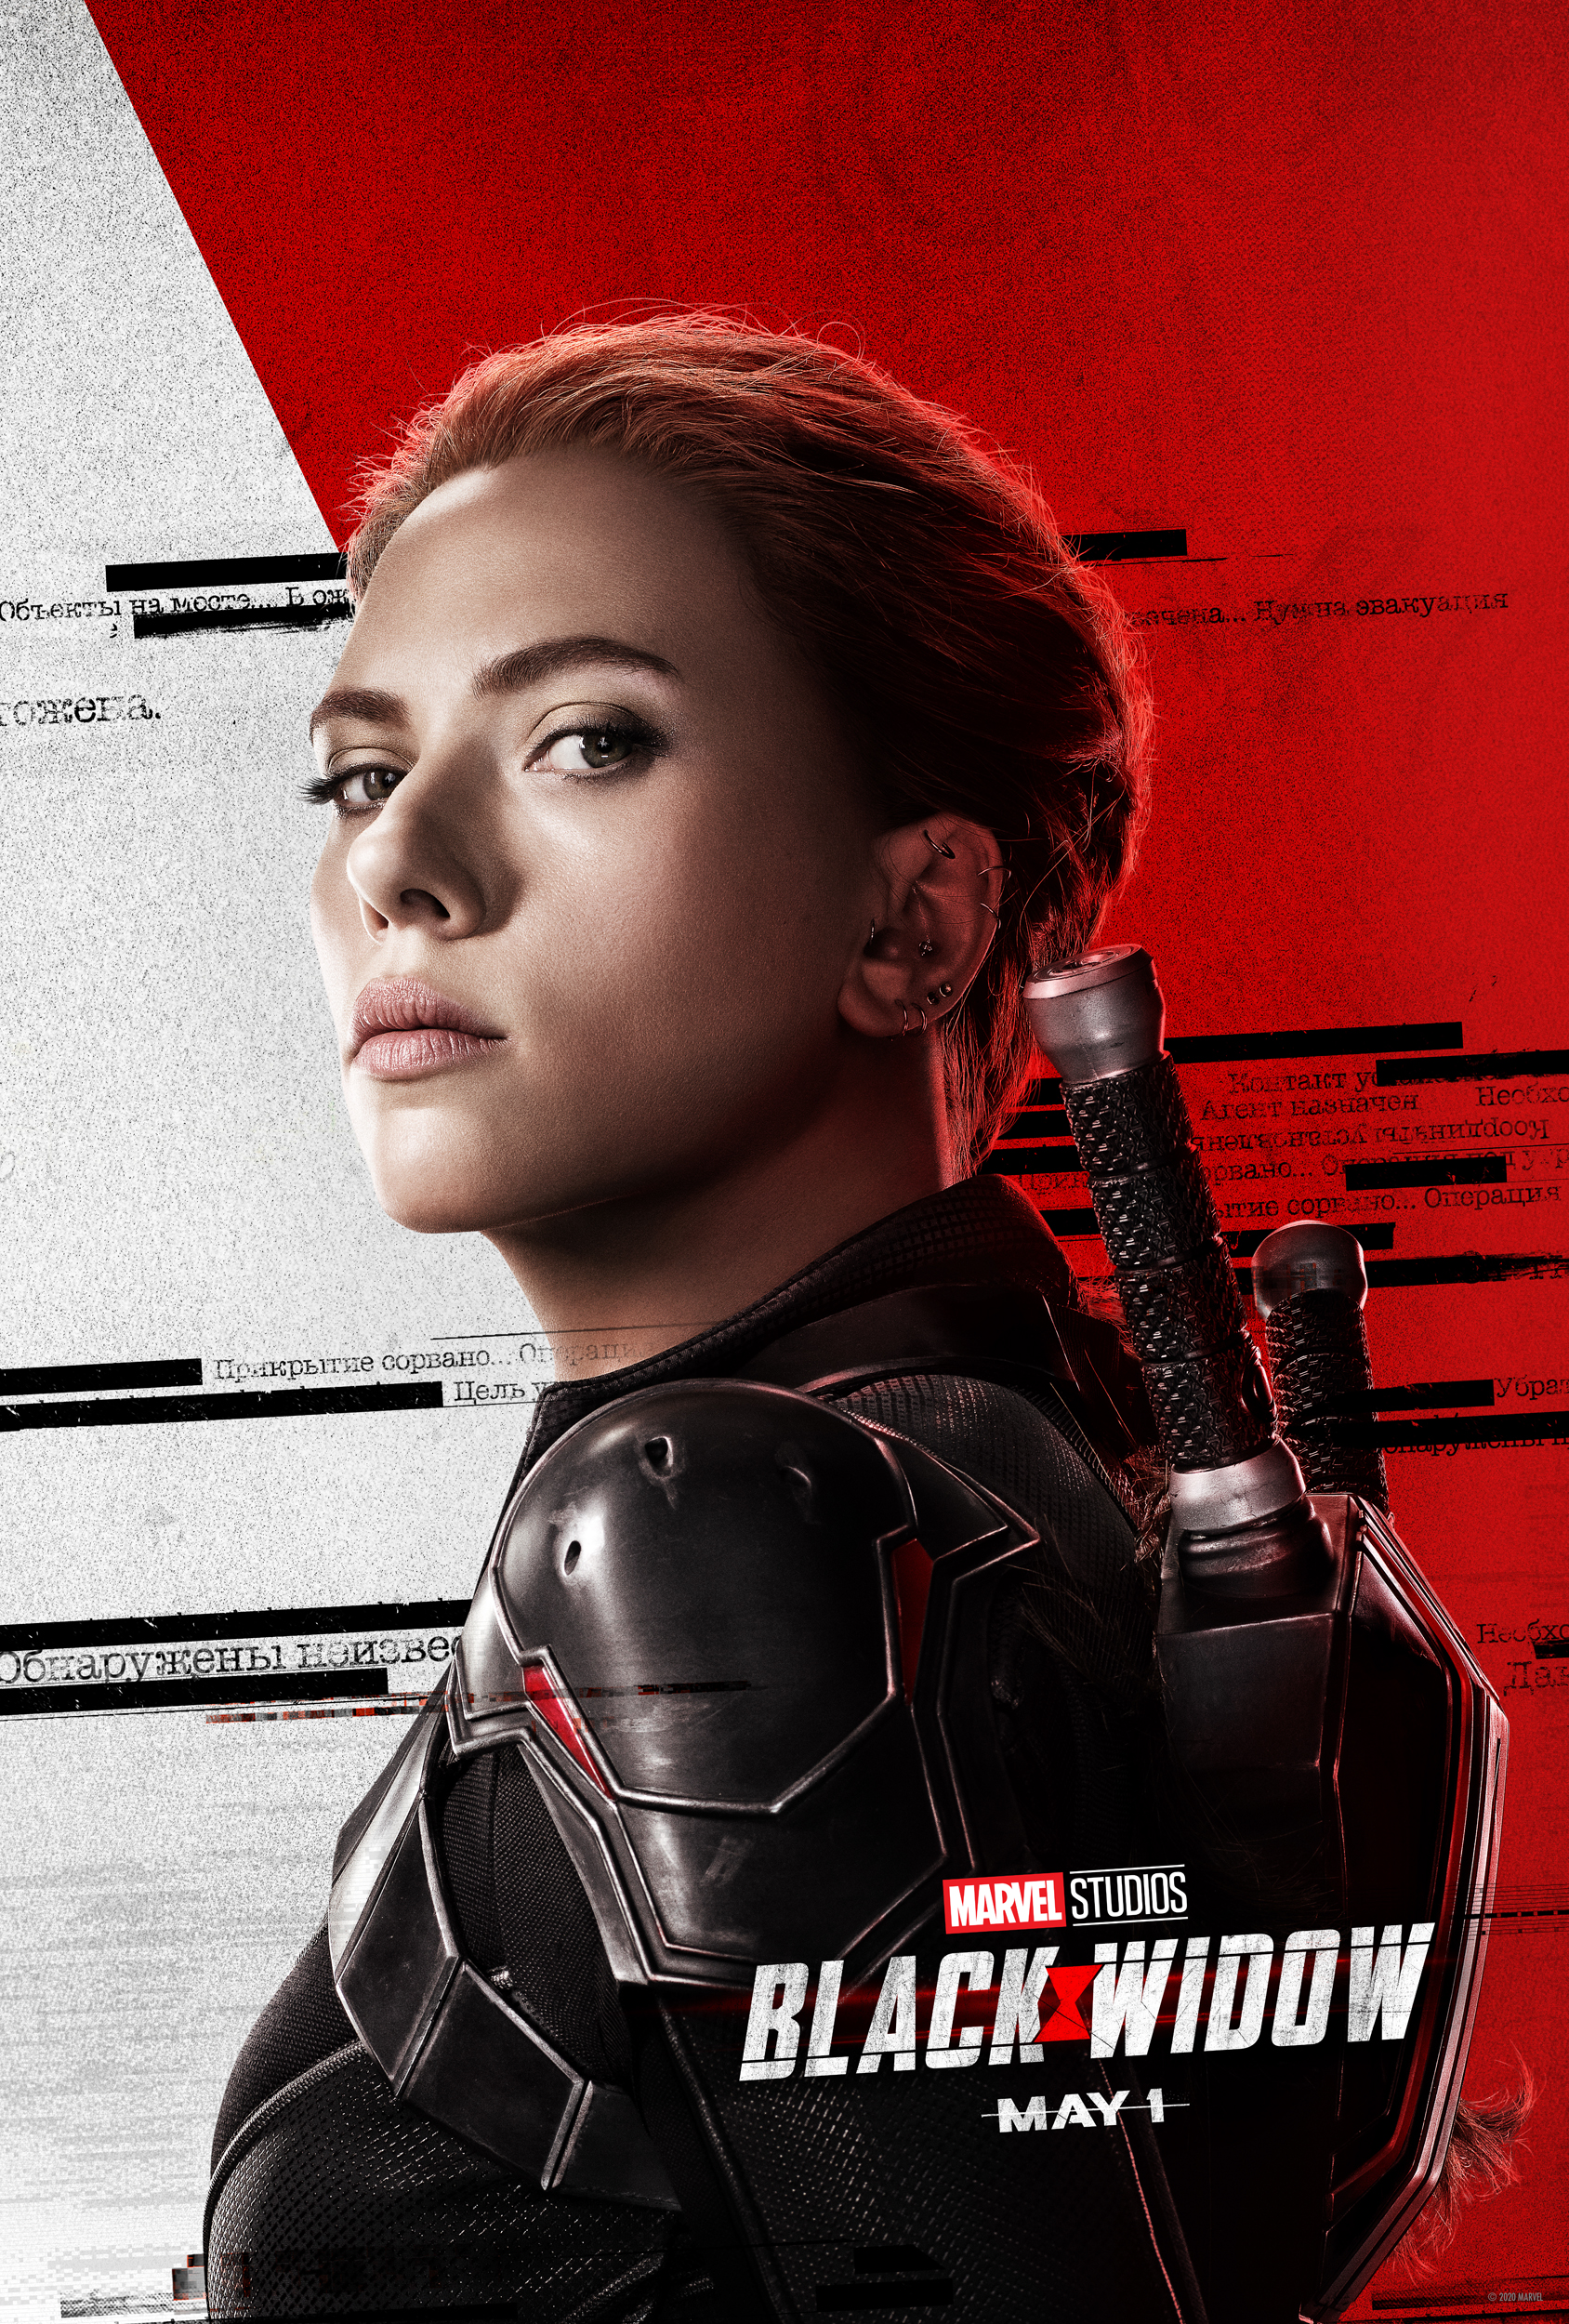 Black Widow Super Bowl Spot And Character Posters Is All About Family